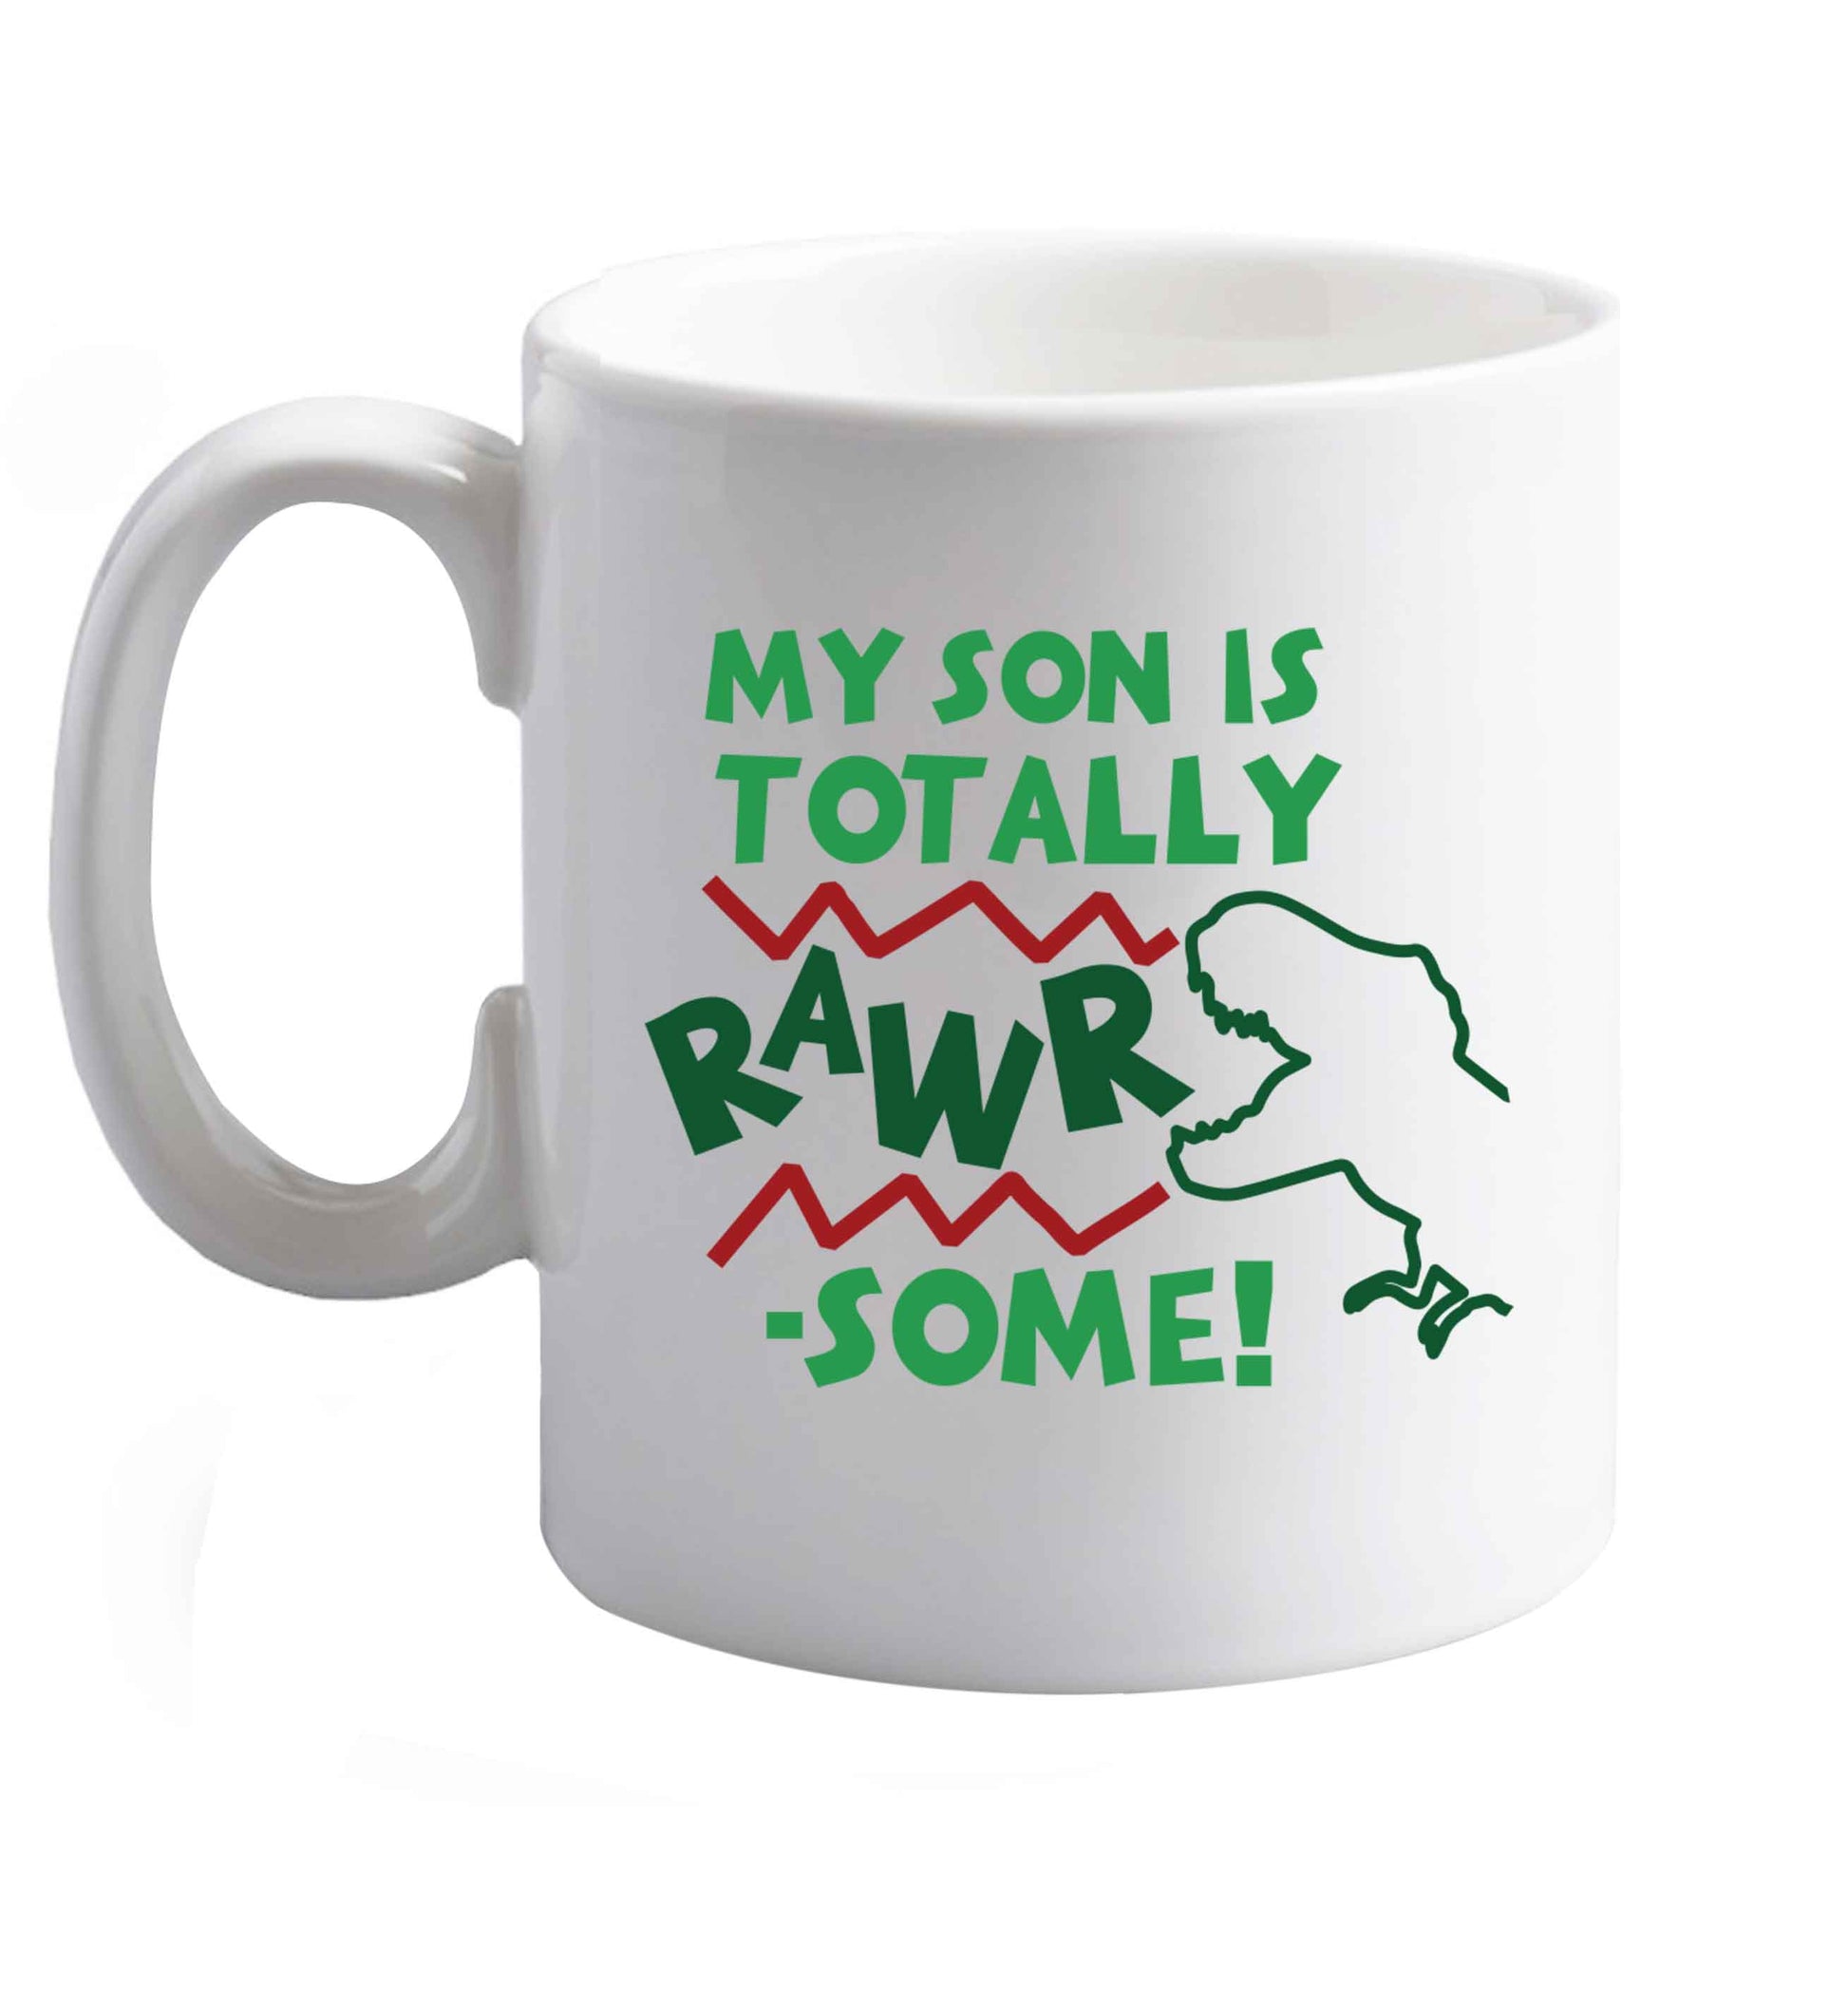 10 oz My son is totally rawrsome ceramic mug right handed